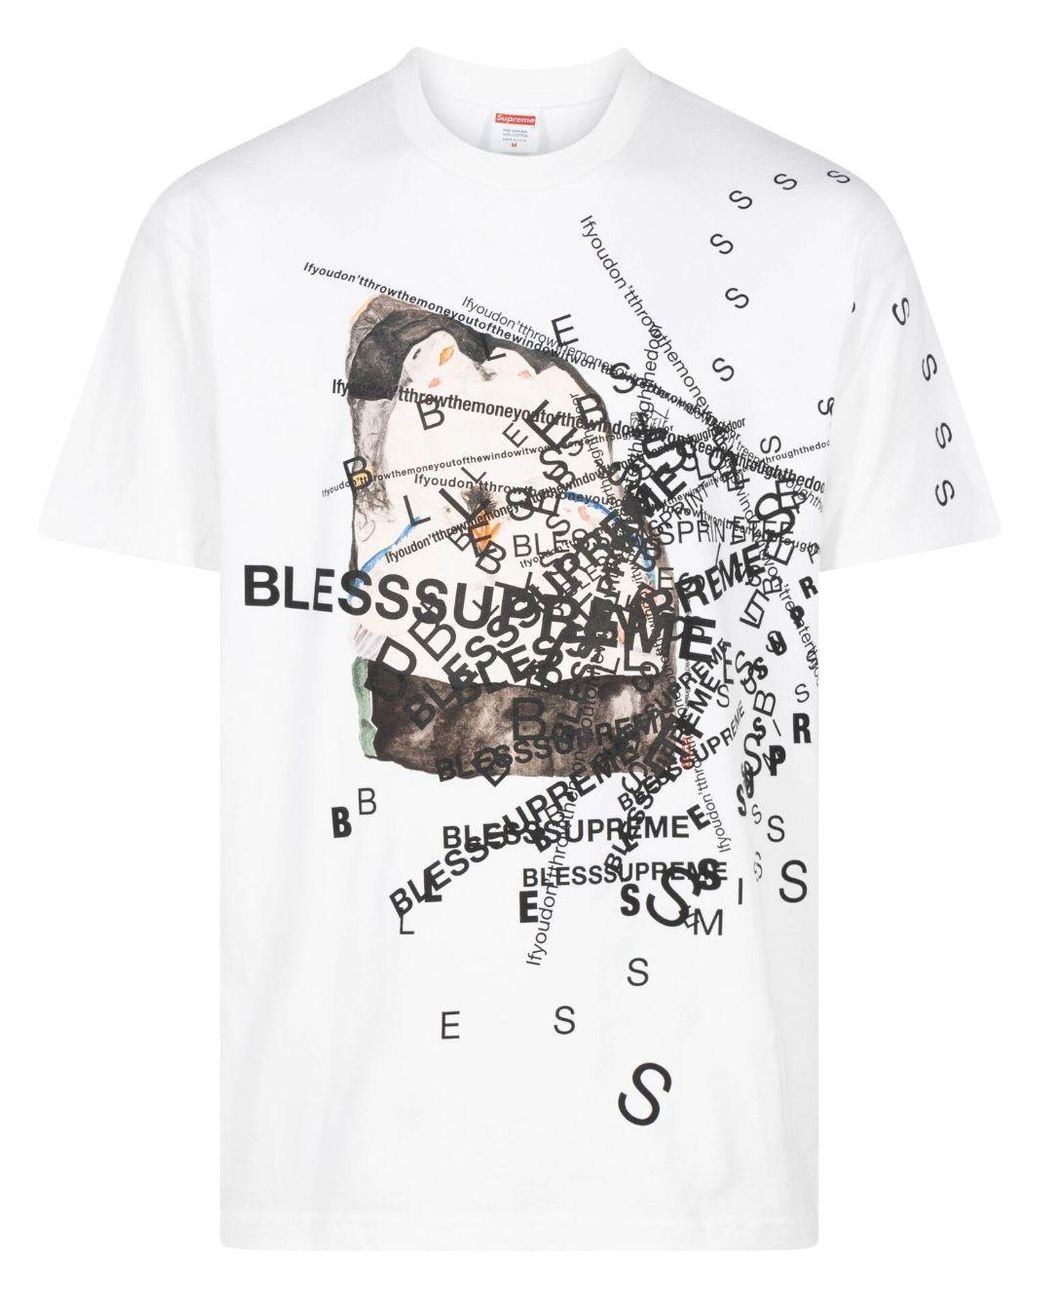 Supreme X Bless Observed In A Dream T-shirt in White | Lyst